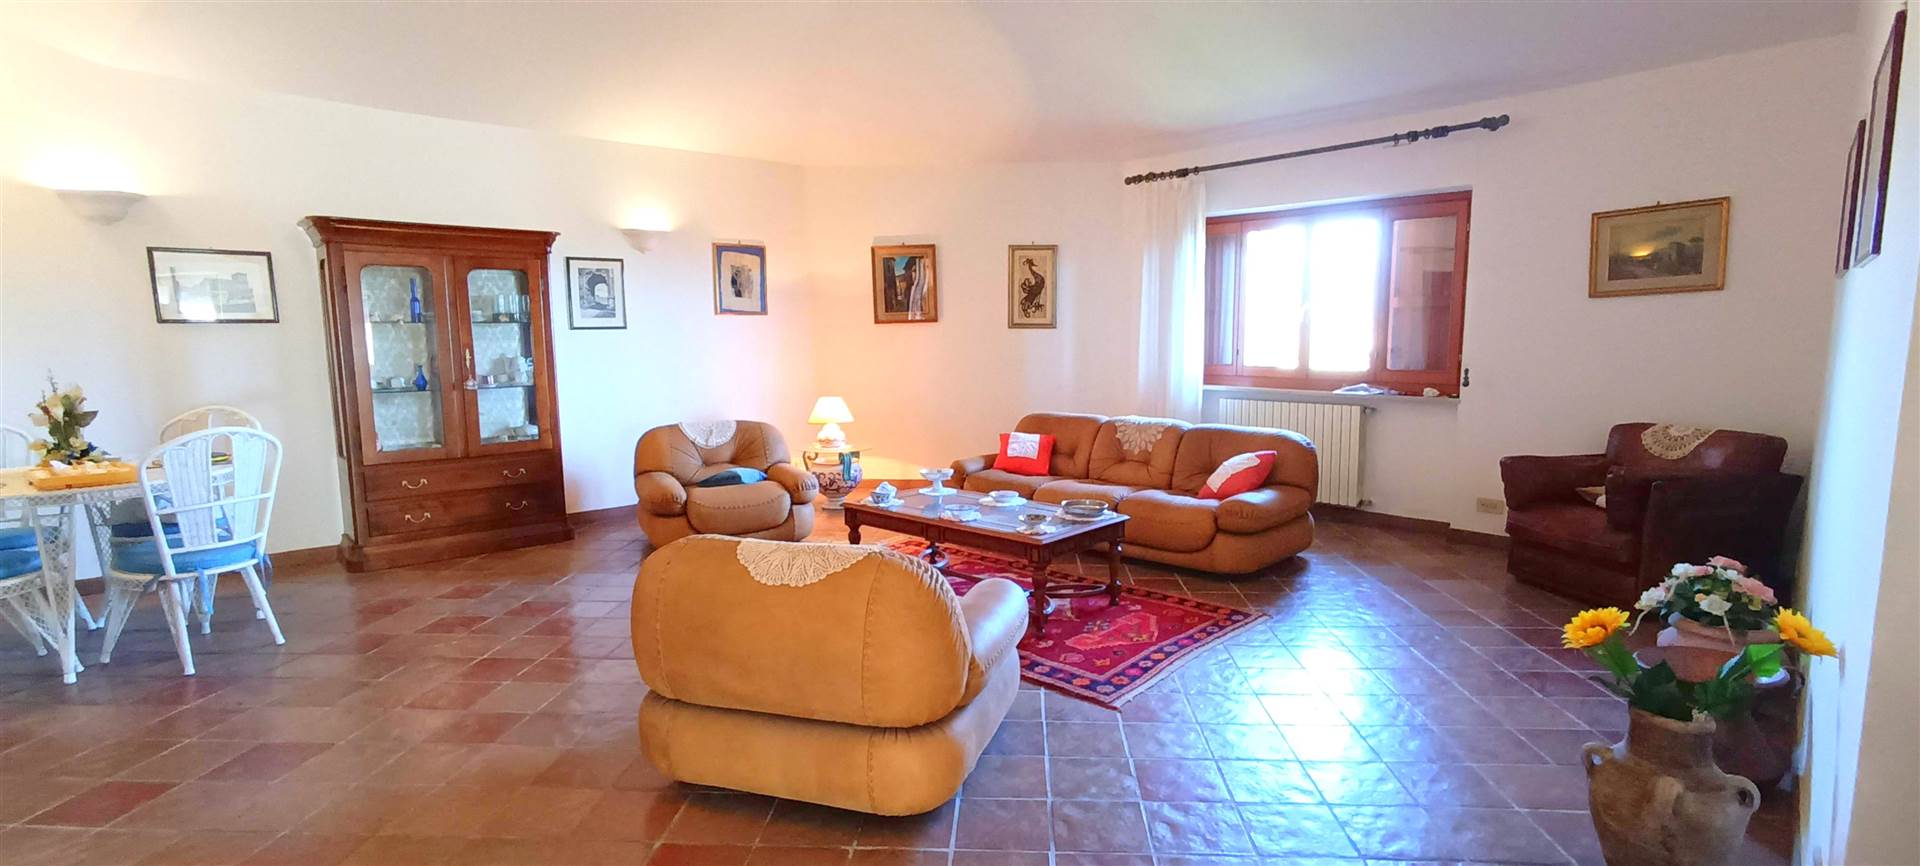 TARANO, Apartment for sale of 343 Sq. mt., Excellent Condition, Heating Individual heating system, Energetic class: G, placed at Ground, composed by: 